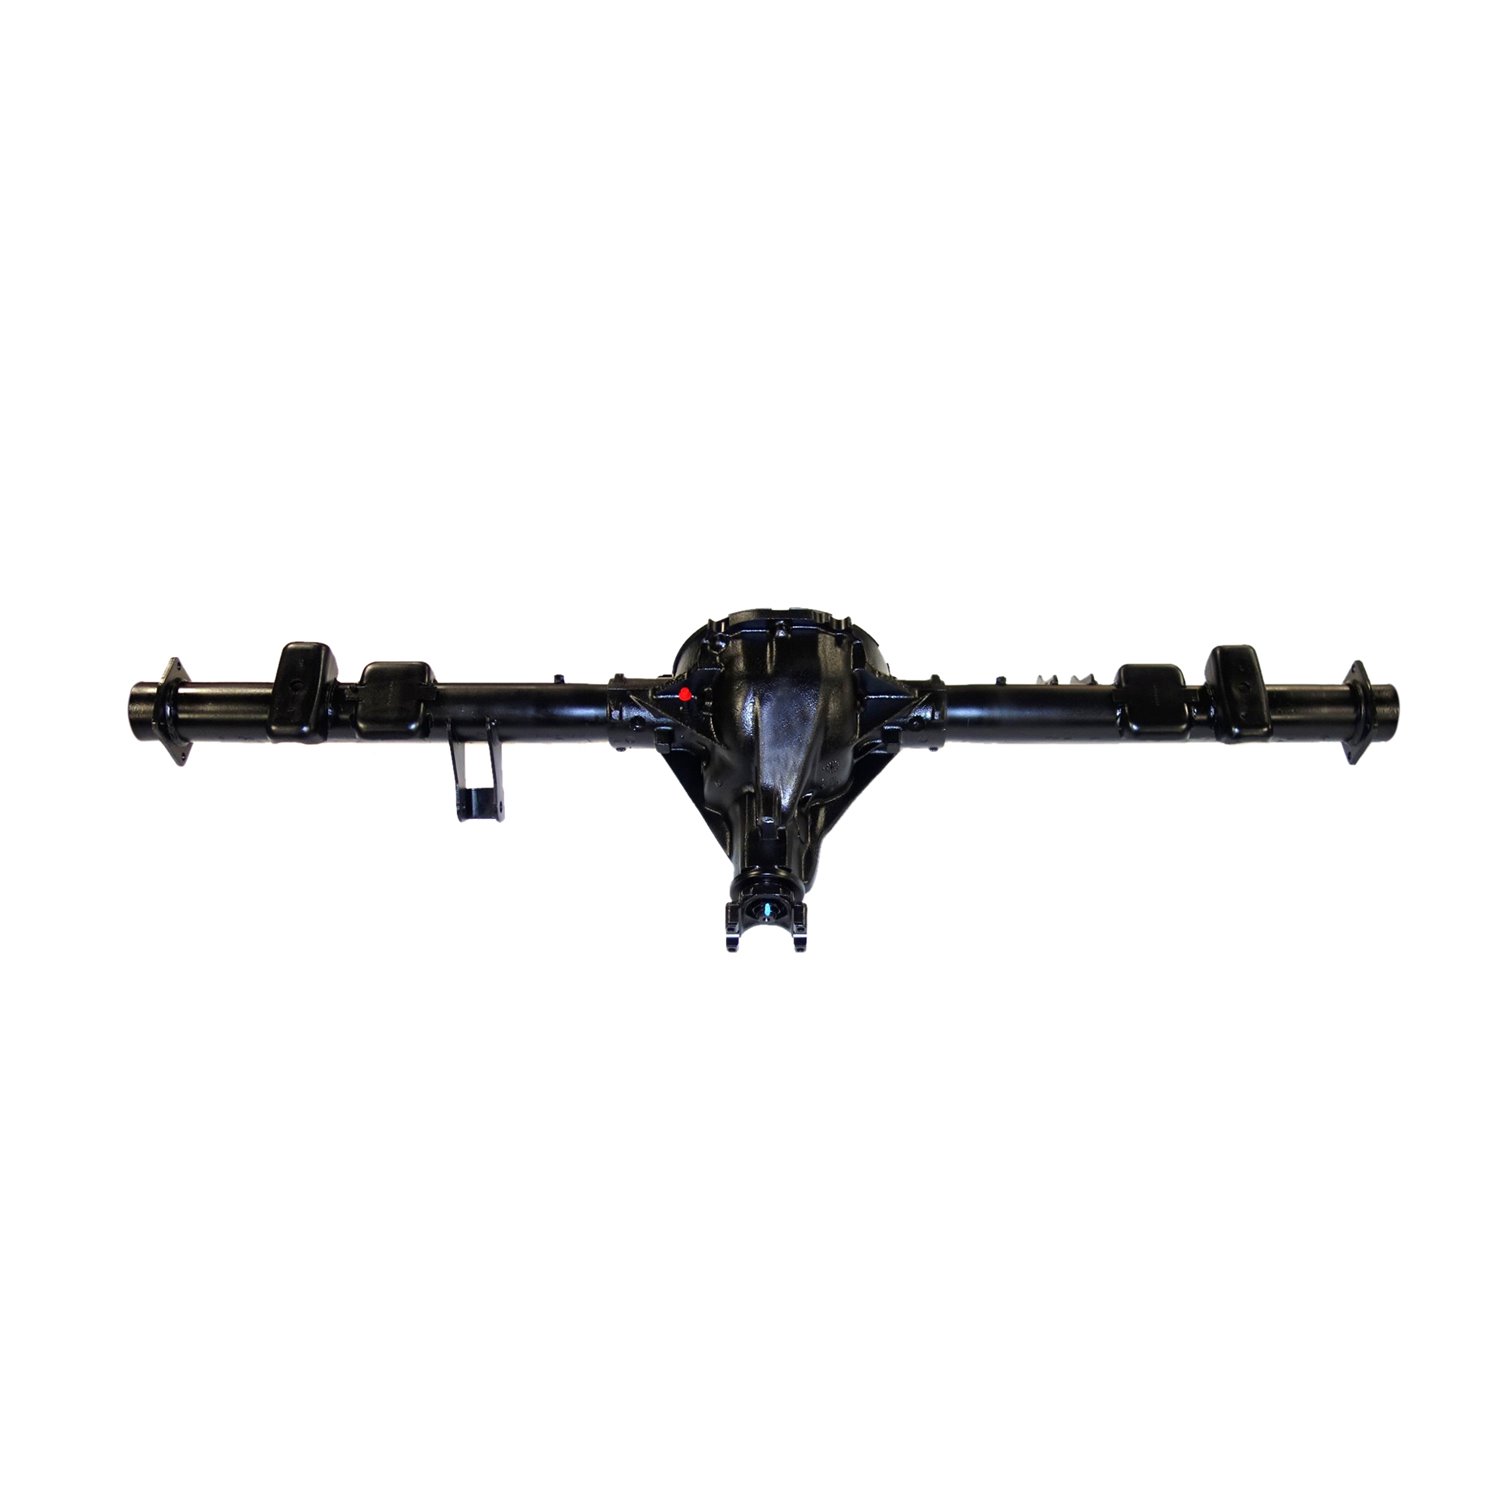 Remanufactured Complete Axle Assembly for GM 8.5" 95-99 GM Suburban 1500 3.73 , 5 Lug